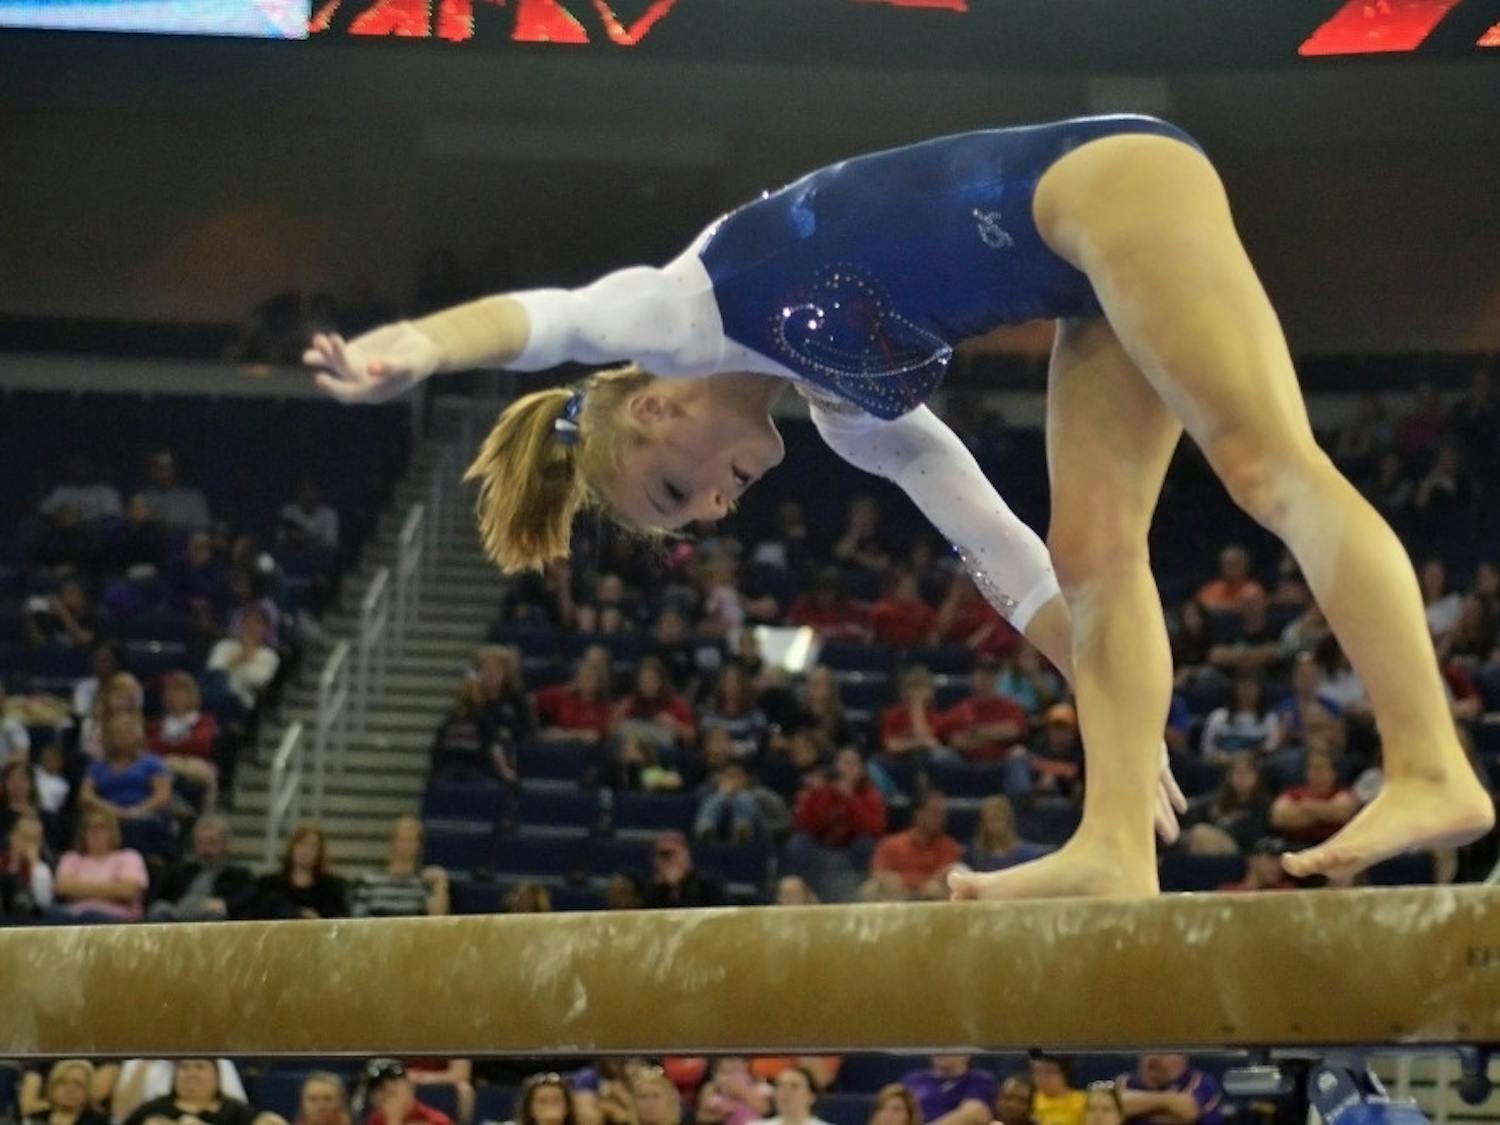 Alex McMurtry falls off the balance beam during the Southeastern Conference Championships on March 21 at the Arena at Gwinnett Center in Duluth, Georgia. McMurtry scored a 9.30 on the event.